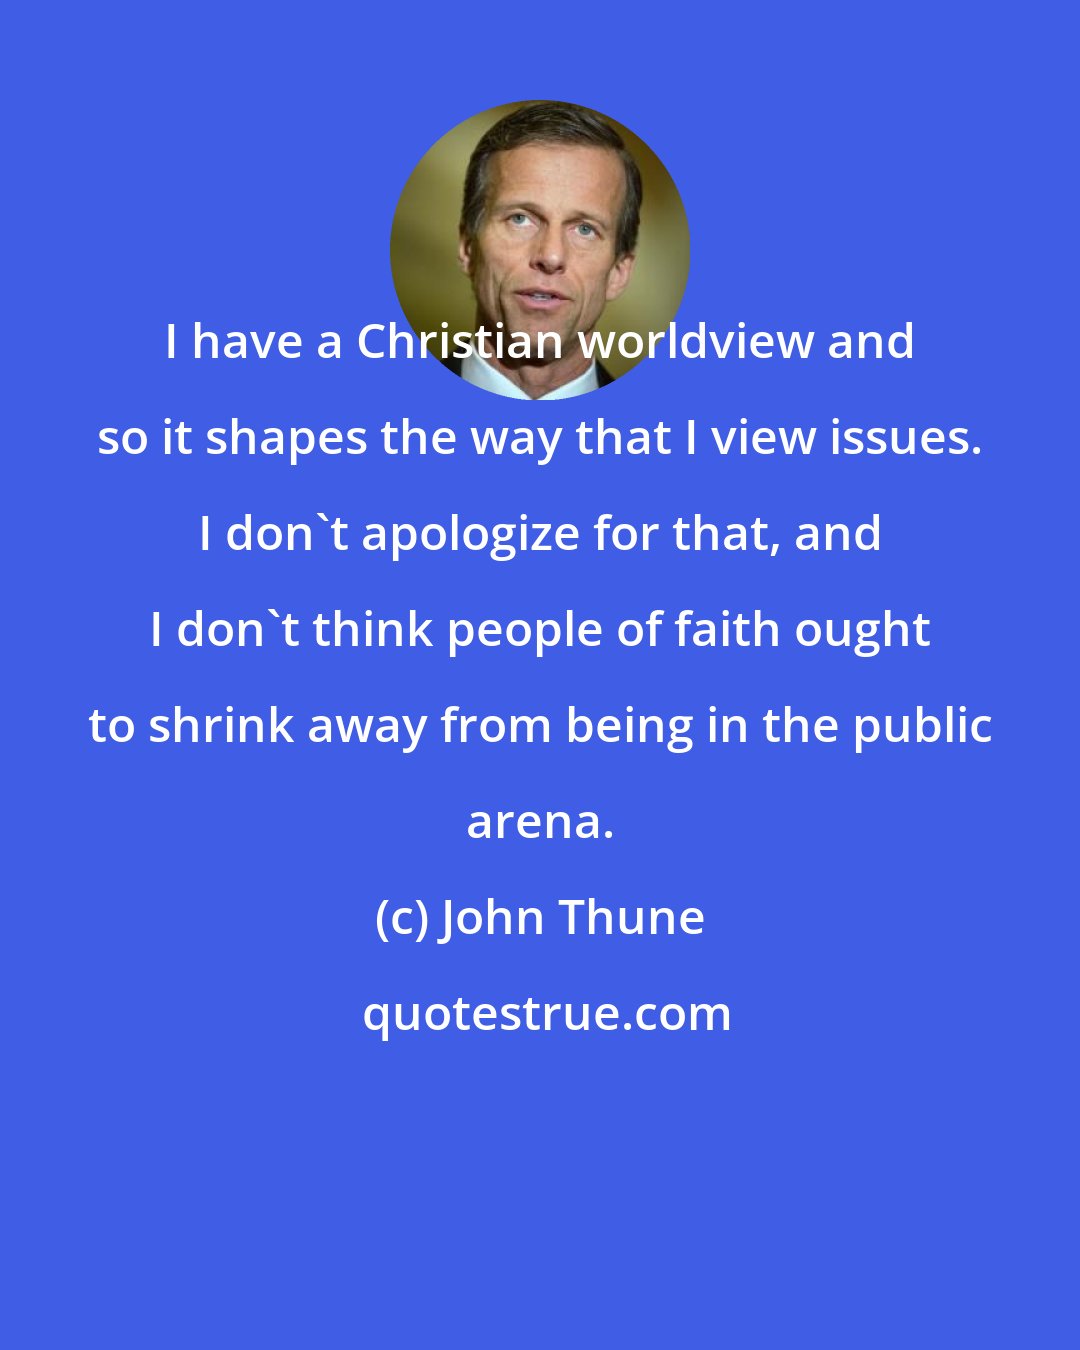 John Thune: I have a Christian worldview and so it shapes the way that I view issues. I don't apologize for that, and I don't think people of faith ought to shrink away from being in the public arena.